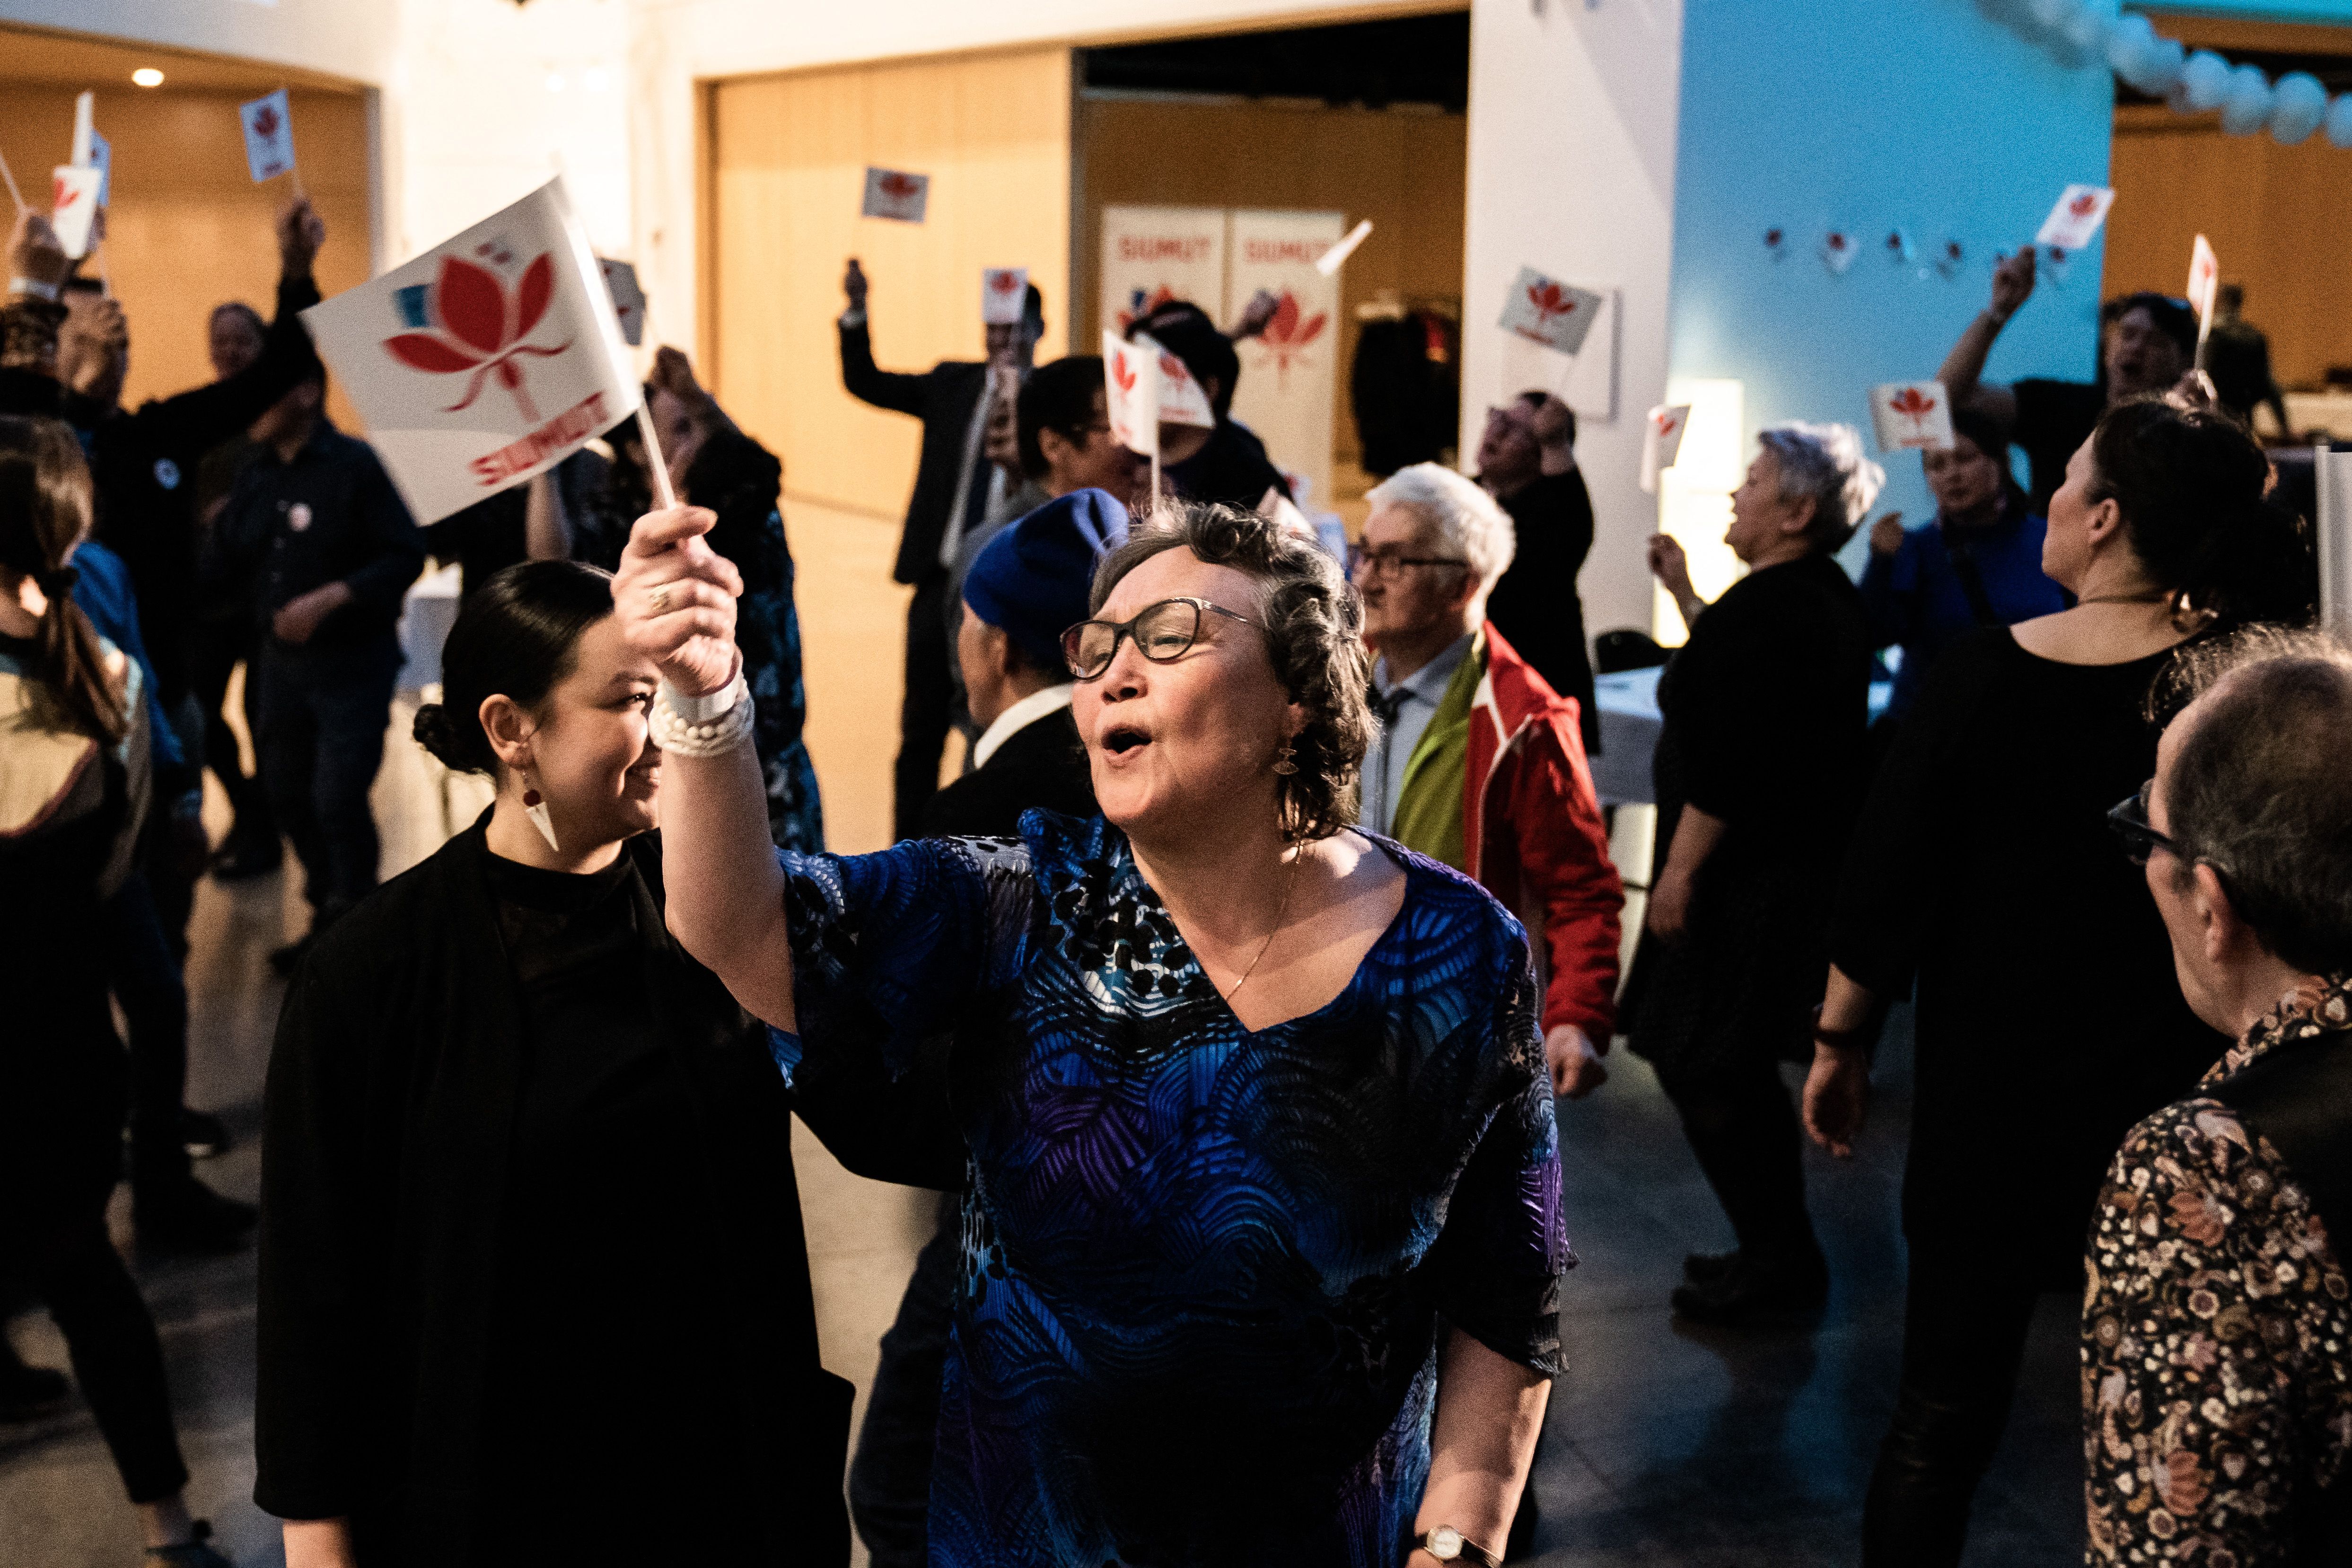 Members of the Siumut party wave party flags as they celebrate following the exit polls results of the legislative election in Nuuk photo.